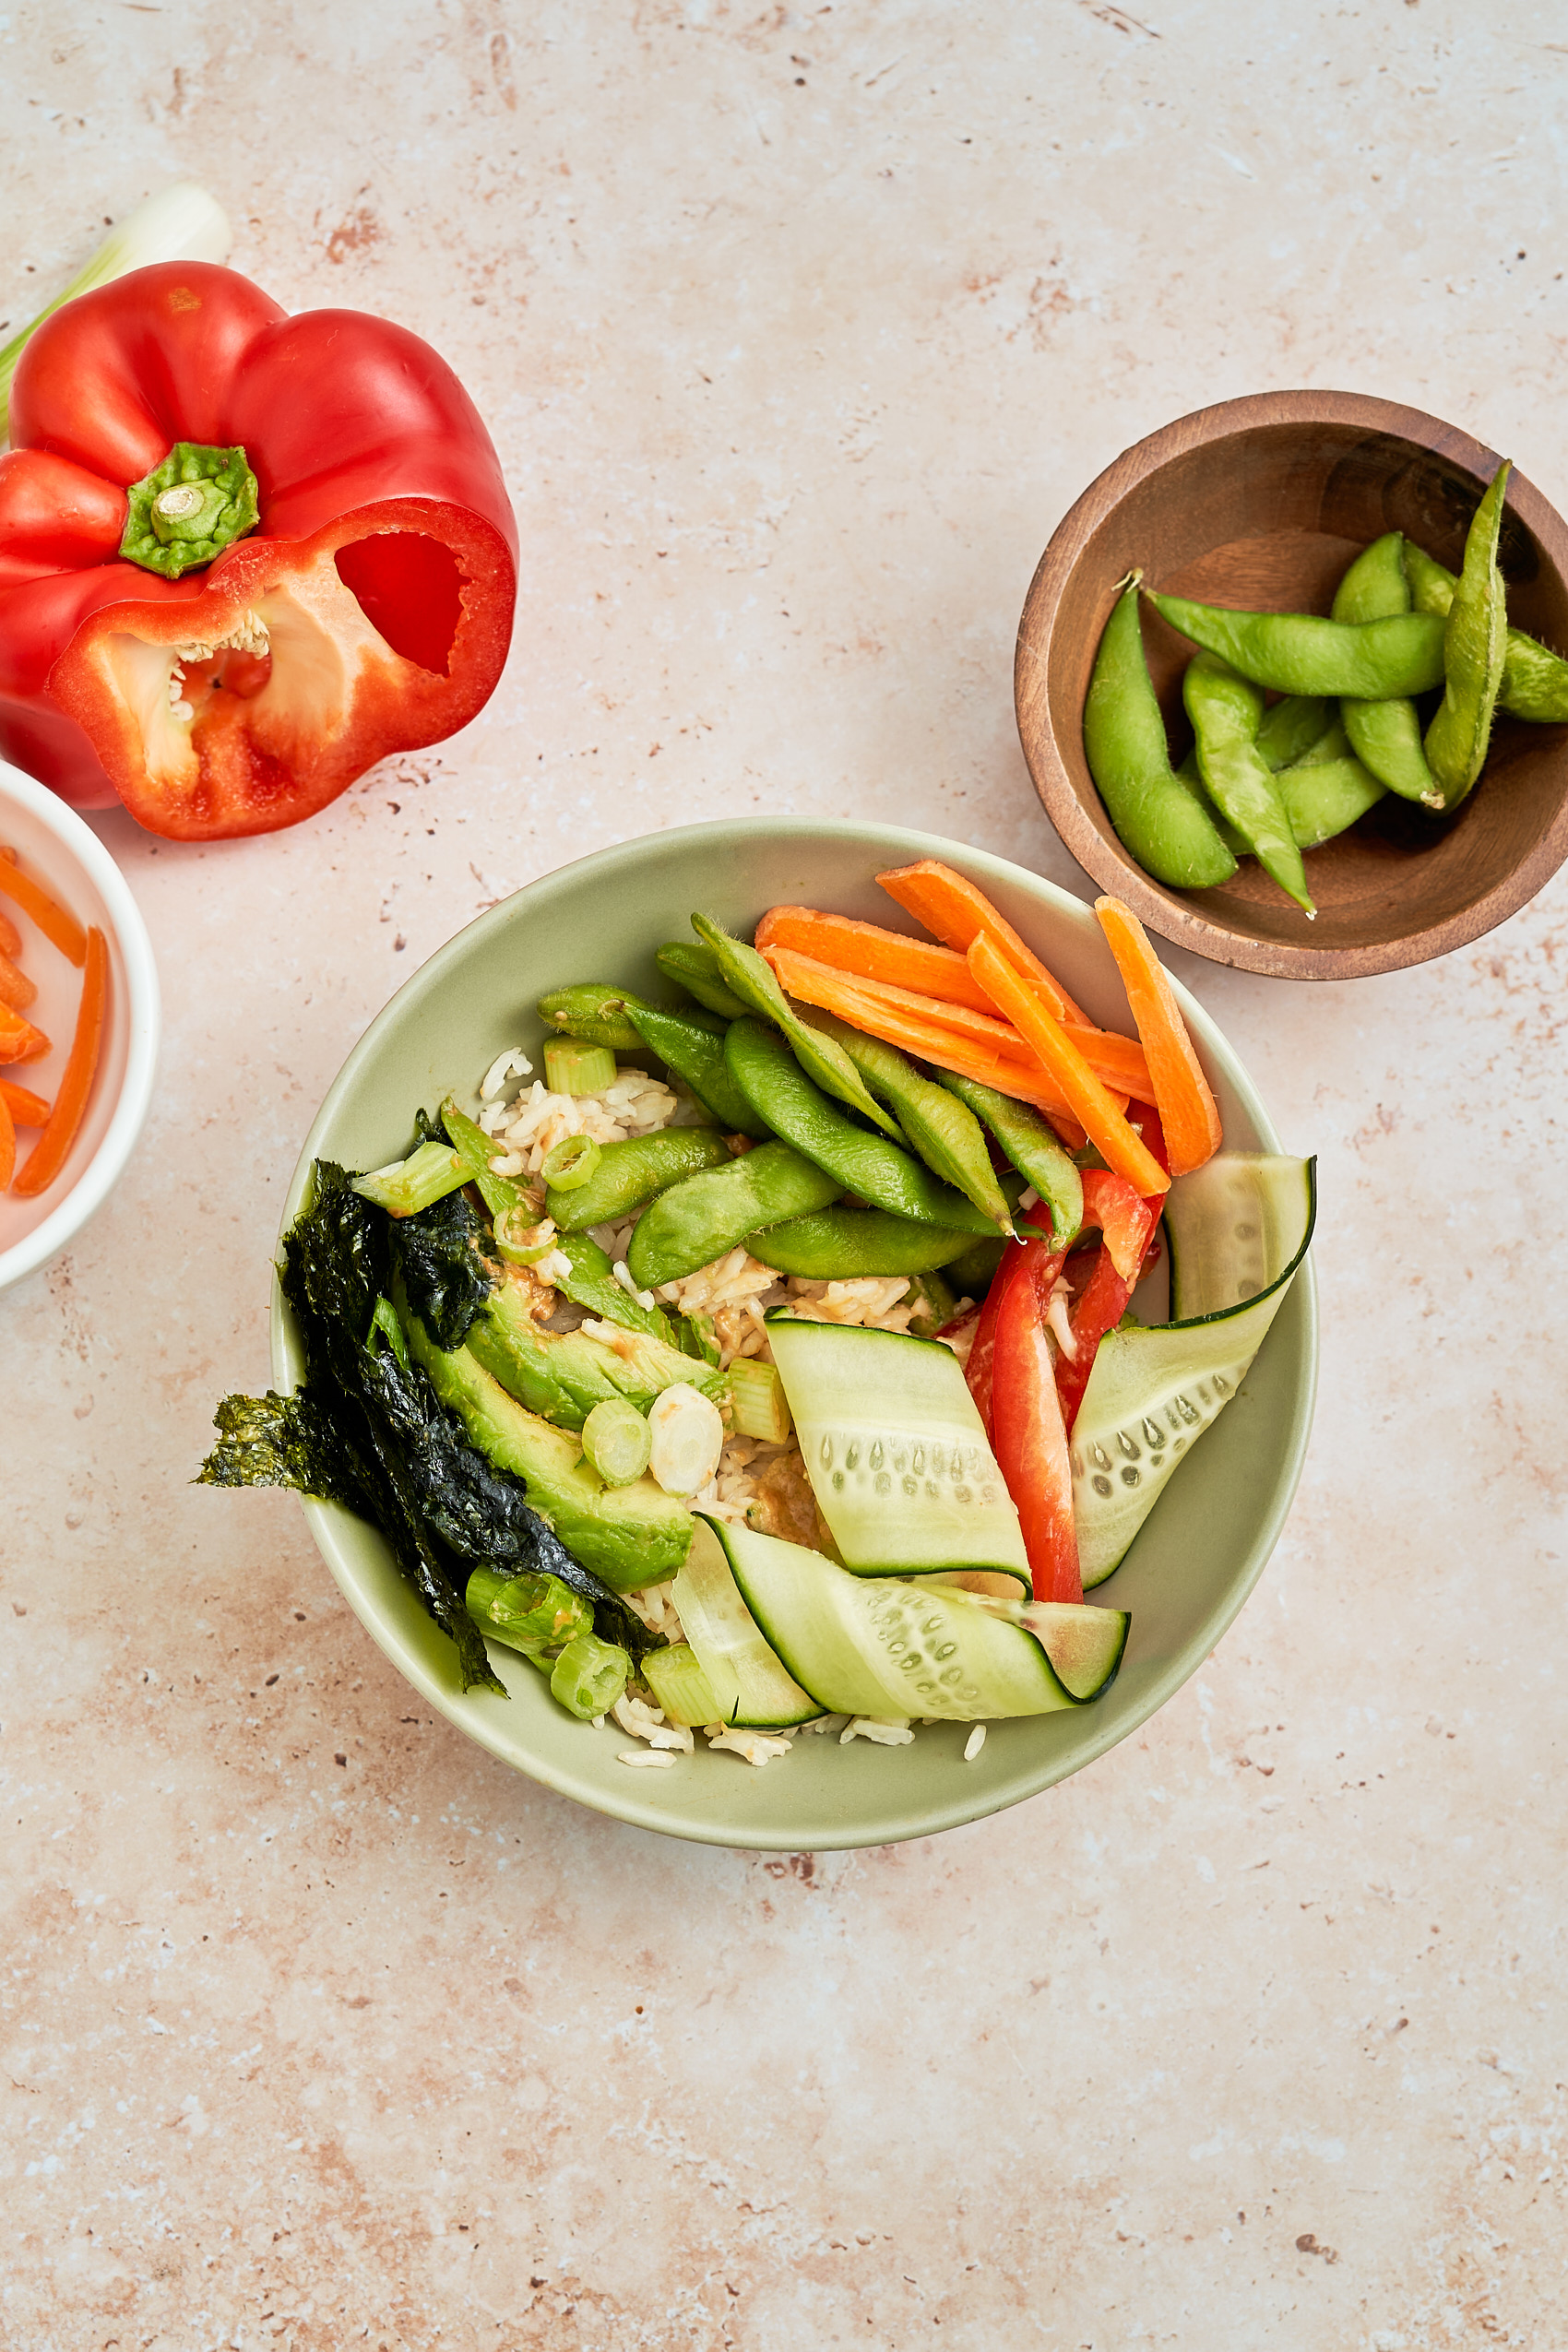 a lunch bowl containing rice, edamame, carrots, bell peppers, nori and avocado